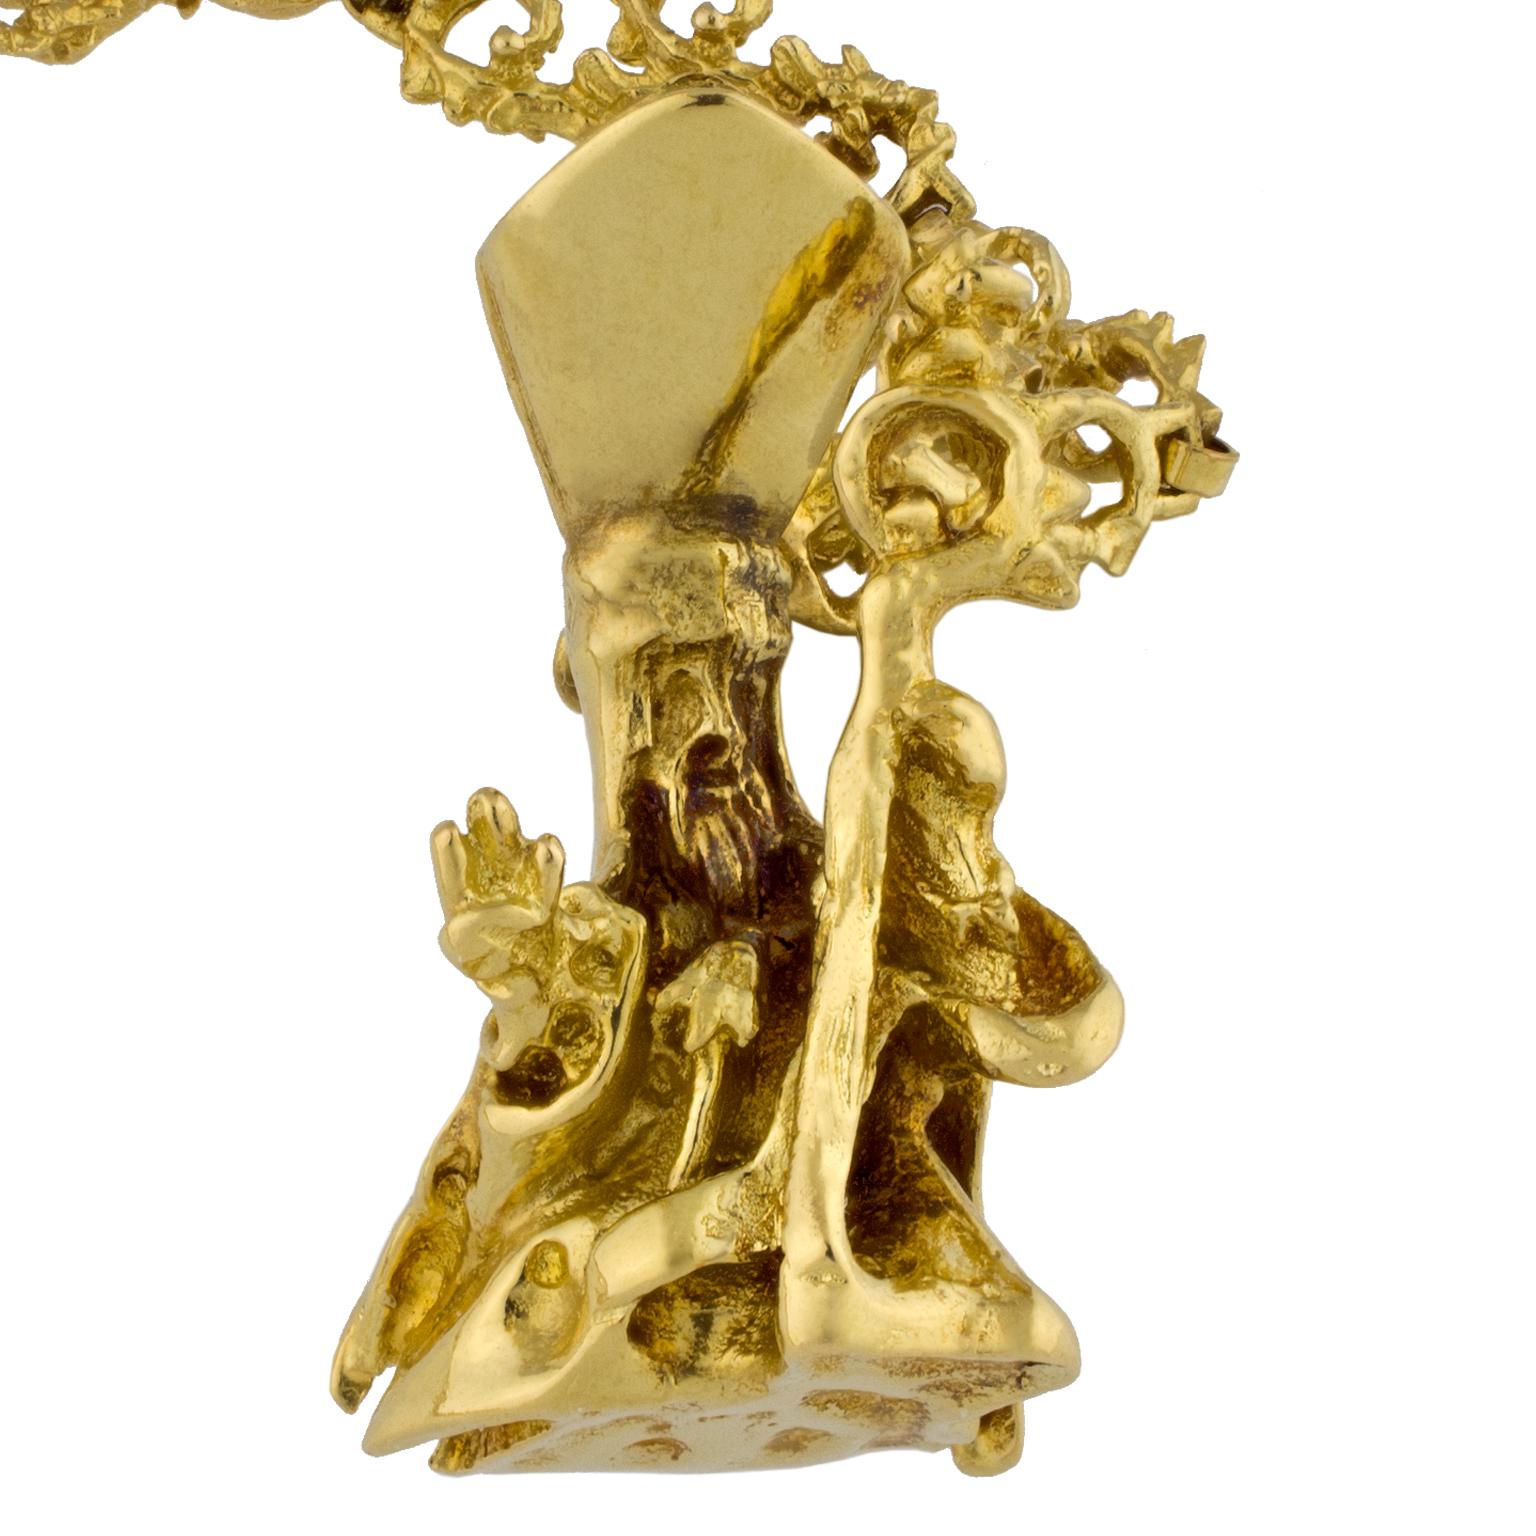 Salvador Dalí's pendant and chain in gold representing Saint Narcissus of the Flies. It comes with the original box and certificate. Missing two chain links from the original piece.
Pendant: height 38mm (1.50 in), width 18mm (0.71 in)
Chain: length